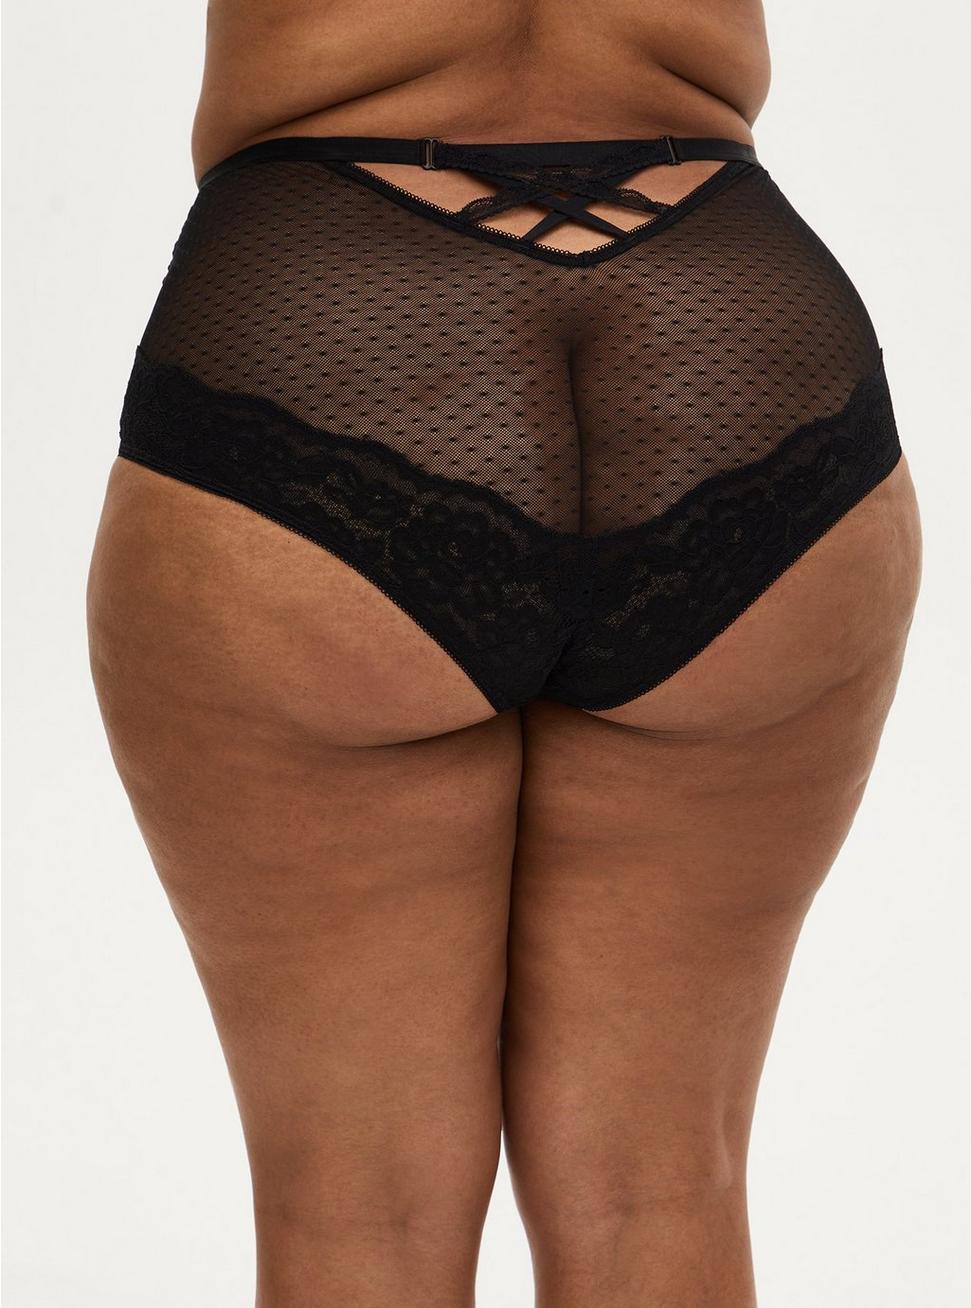 Plus Size - Dot Mesh and Lace Strappy Caged High Waist Brief Panty